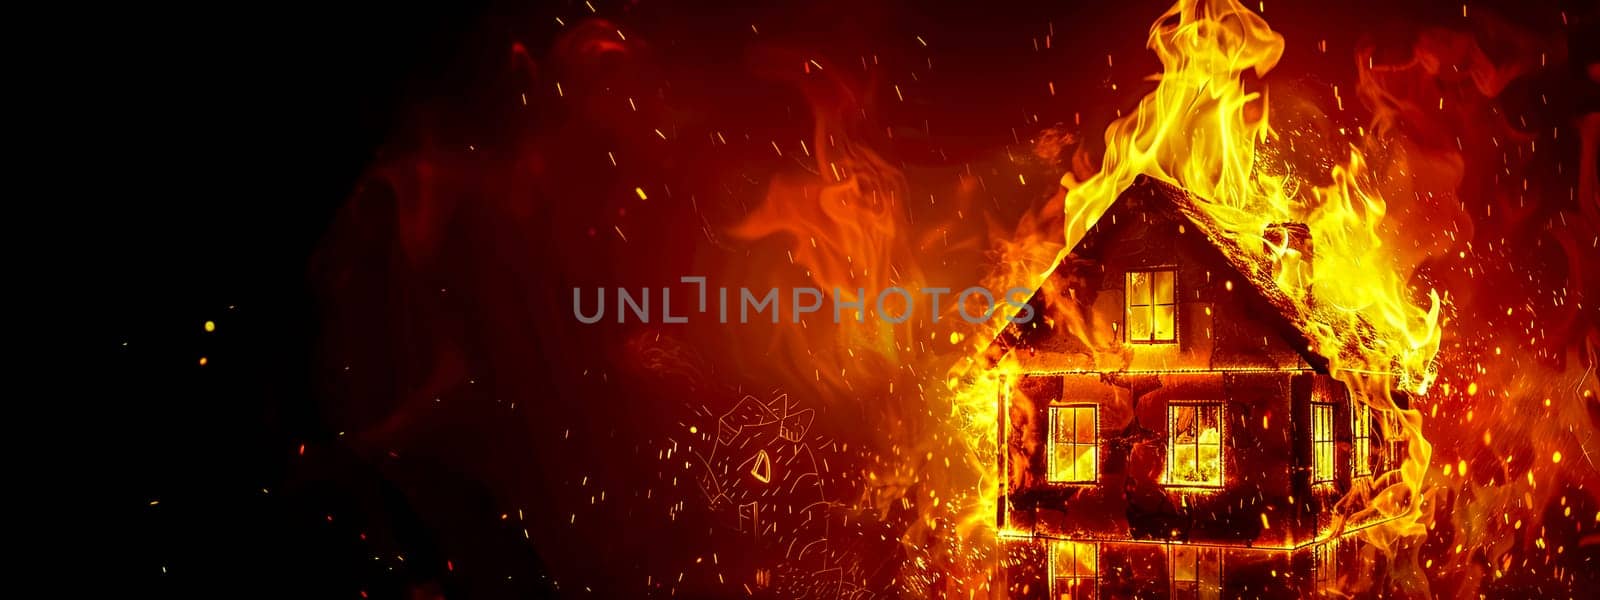 Digital illustration of a house engulfed in flames against a dark background